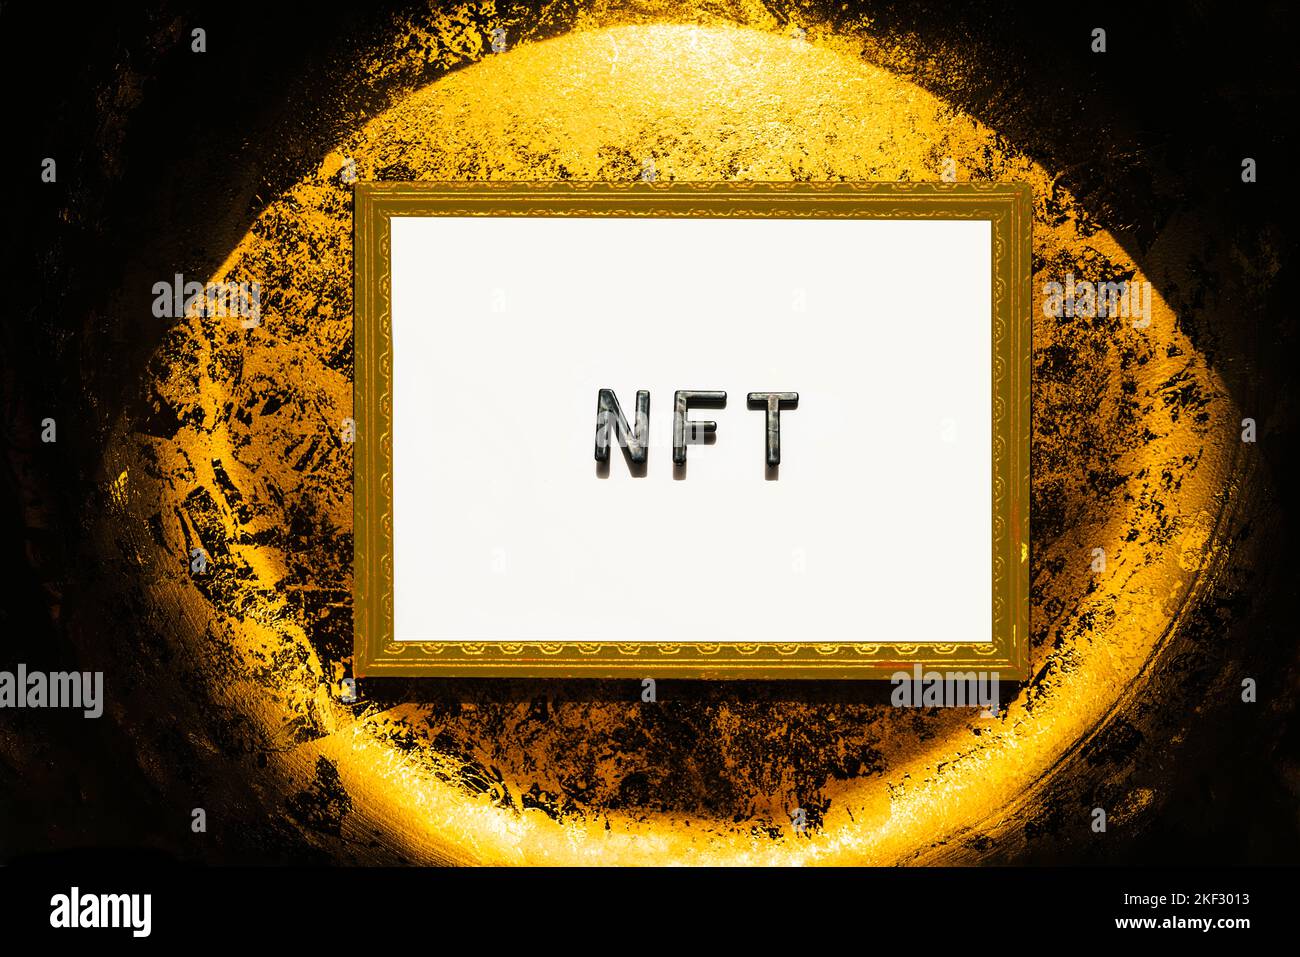 NFT digital crypto art text on white framed on gold background. Non-fungible token cryptocurrency Stock Photo